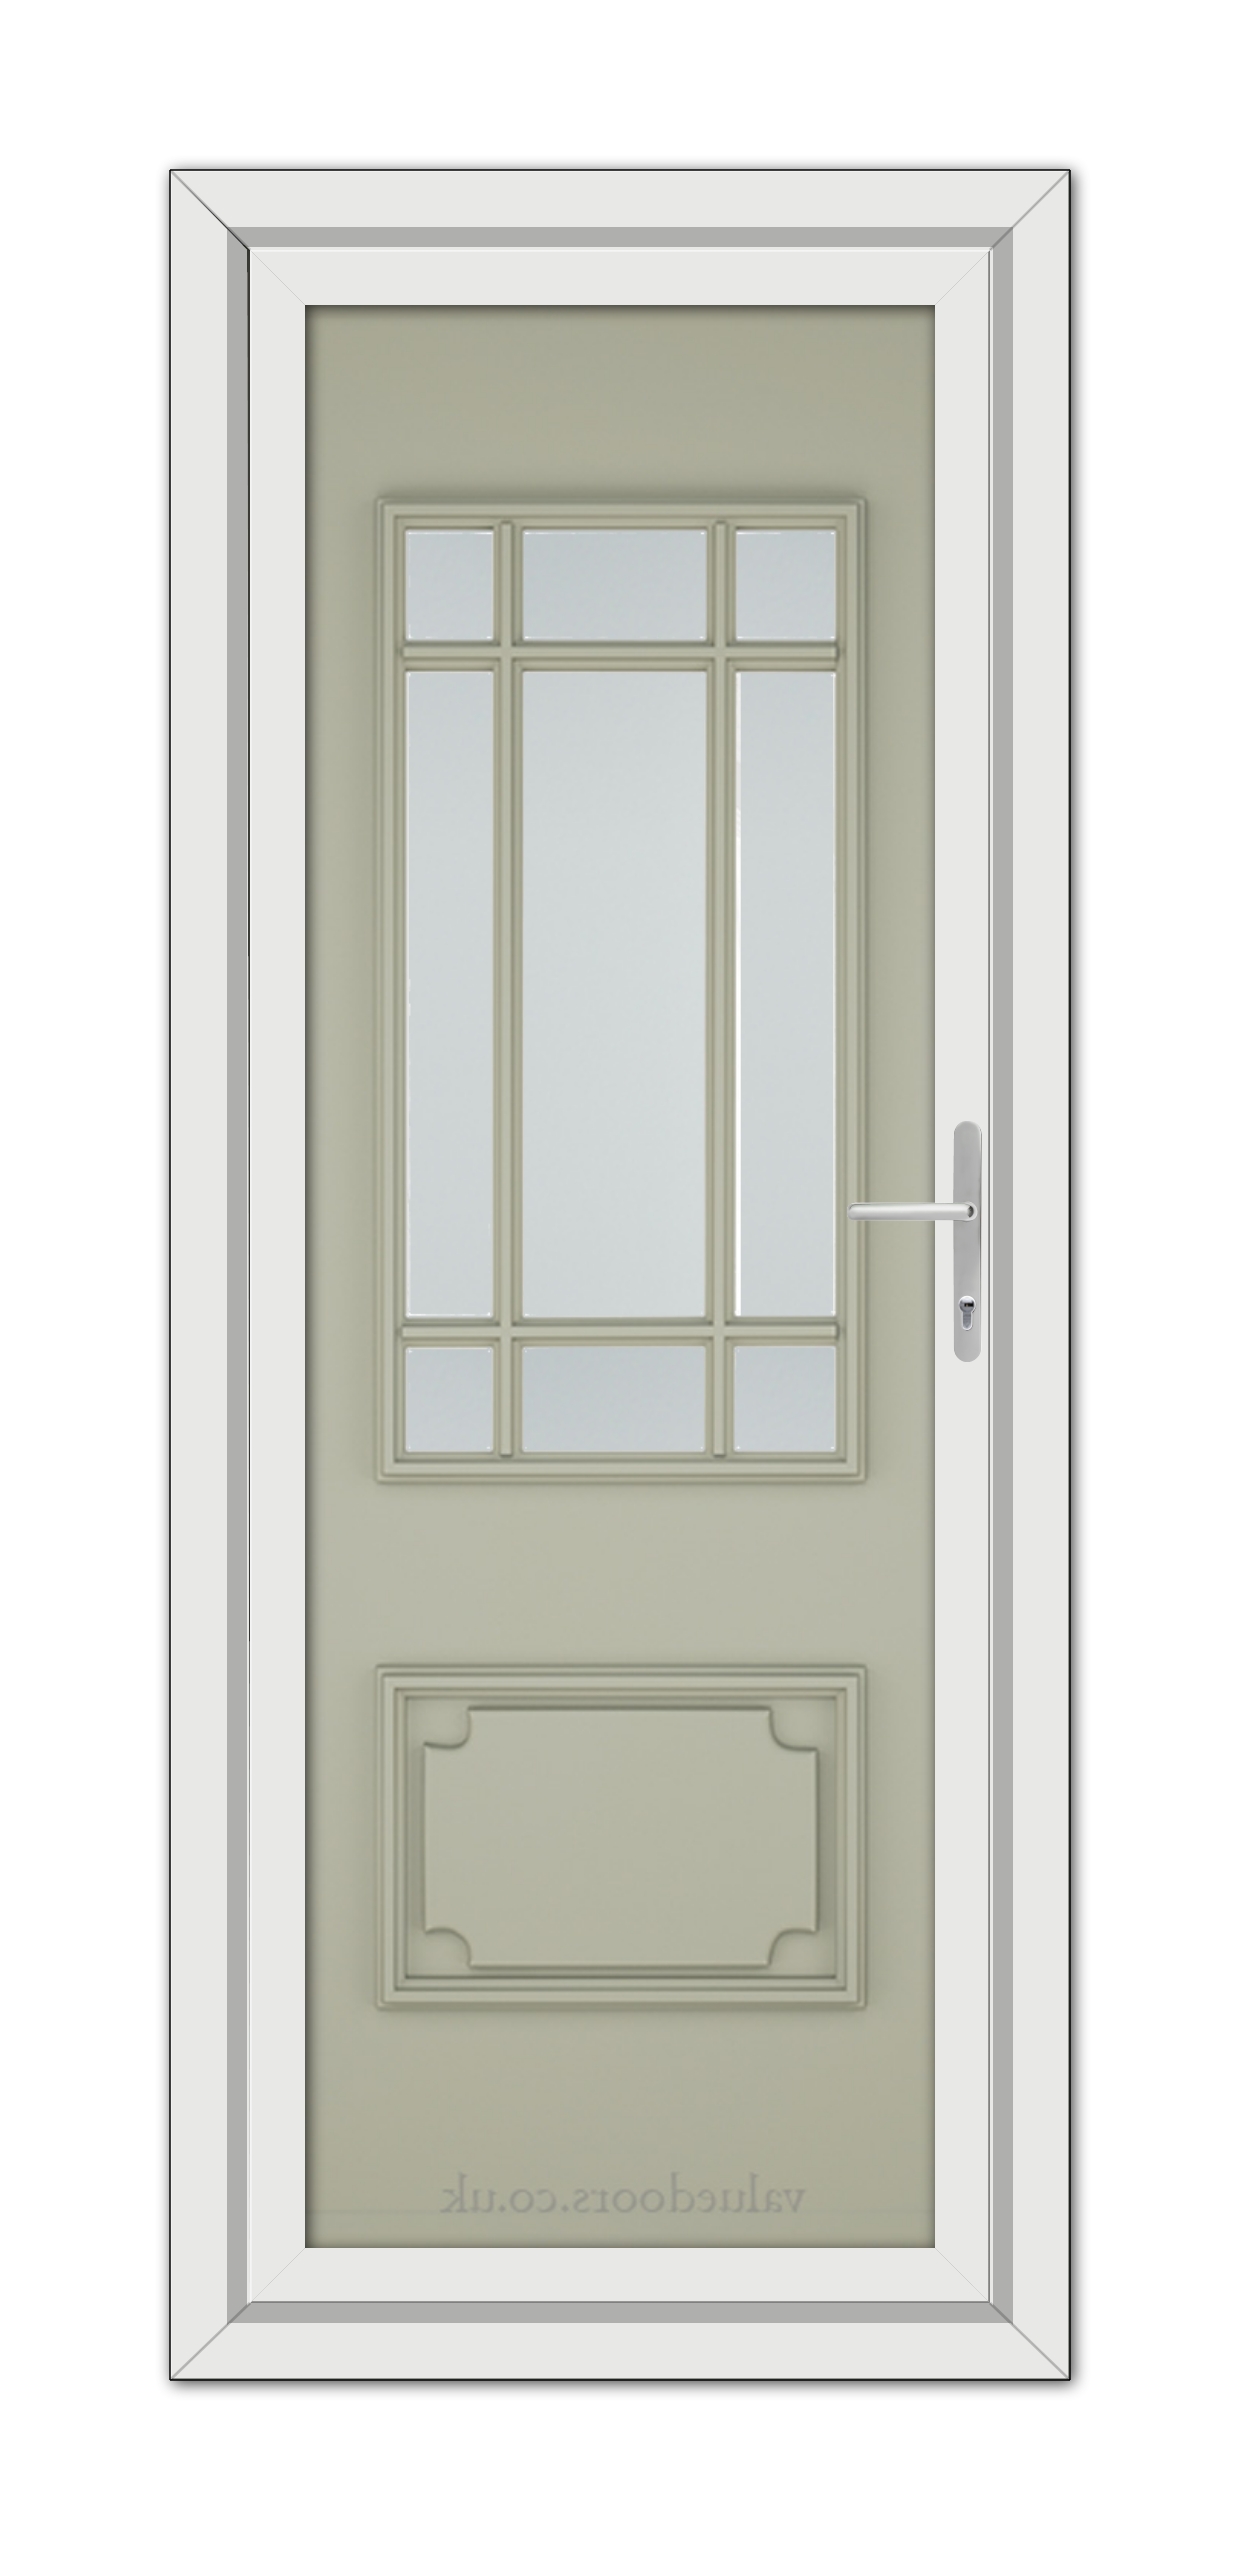 Agate Grey Seville uPVC Door with a white frame, featuring a rectangular glass window with a grid design at the top and a panel design at the bottom.